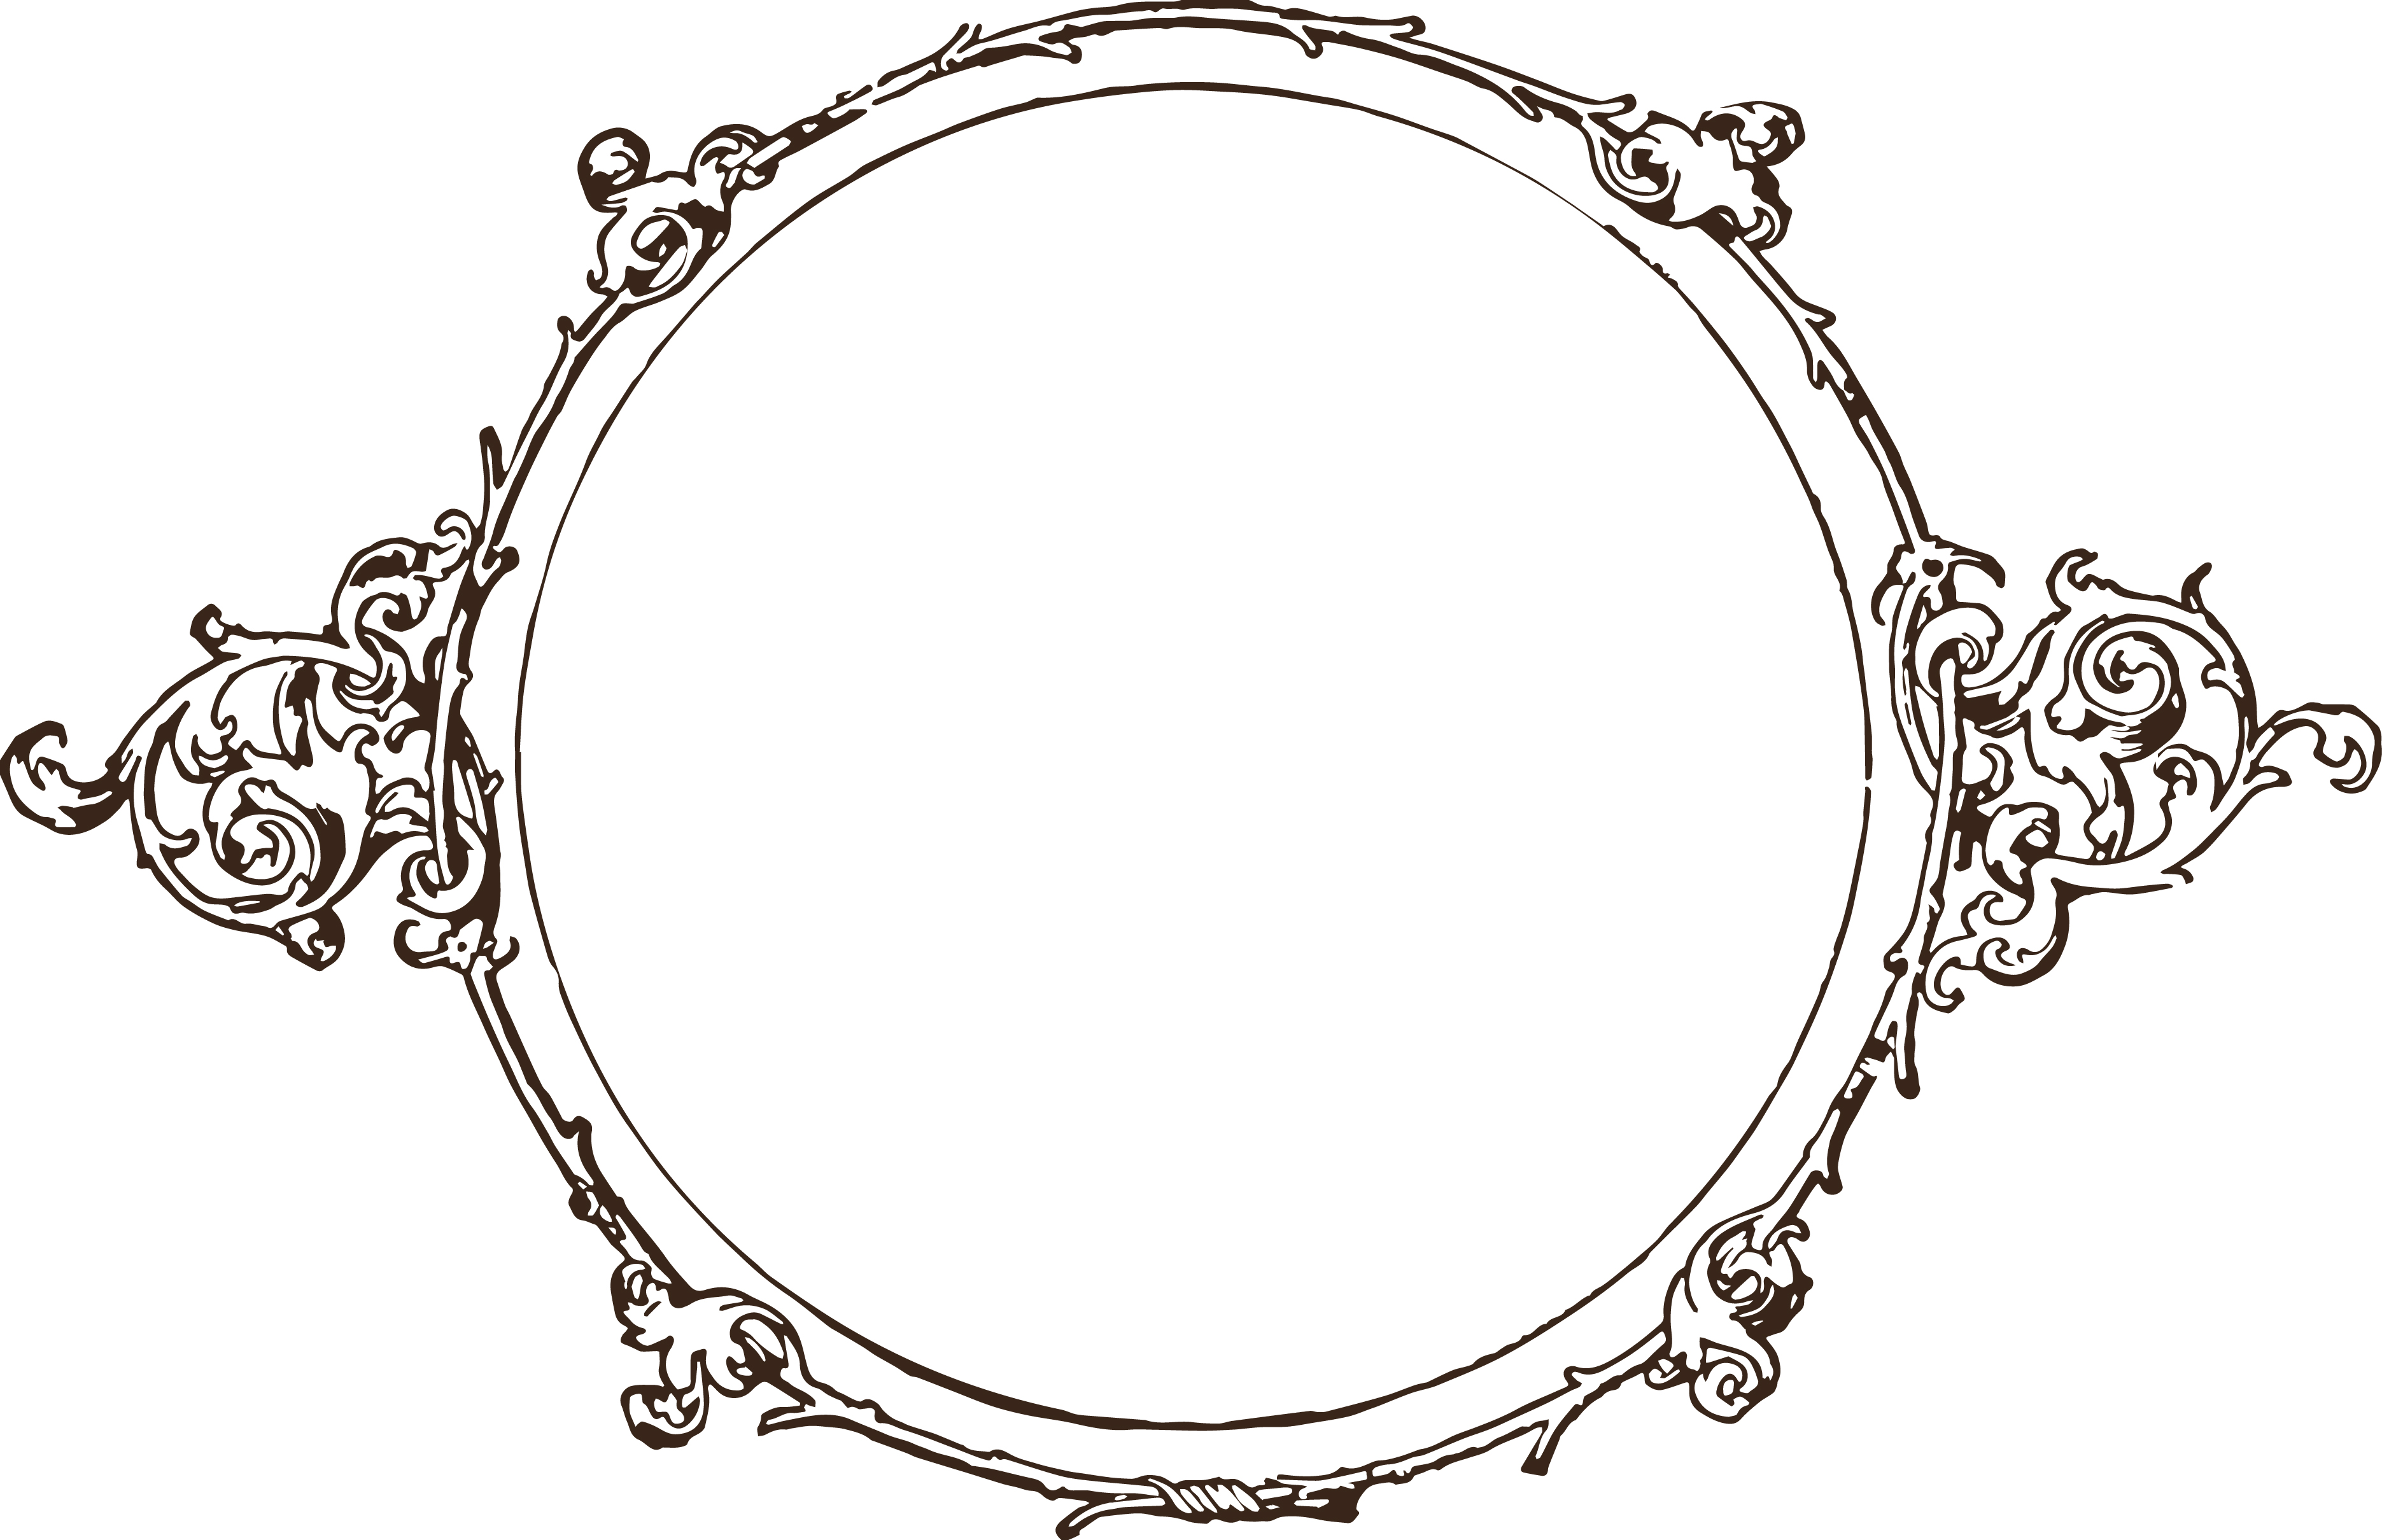 Italian Scroll Work Png Image Clipart